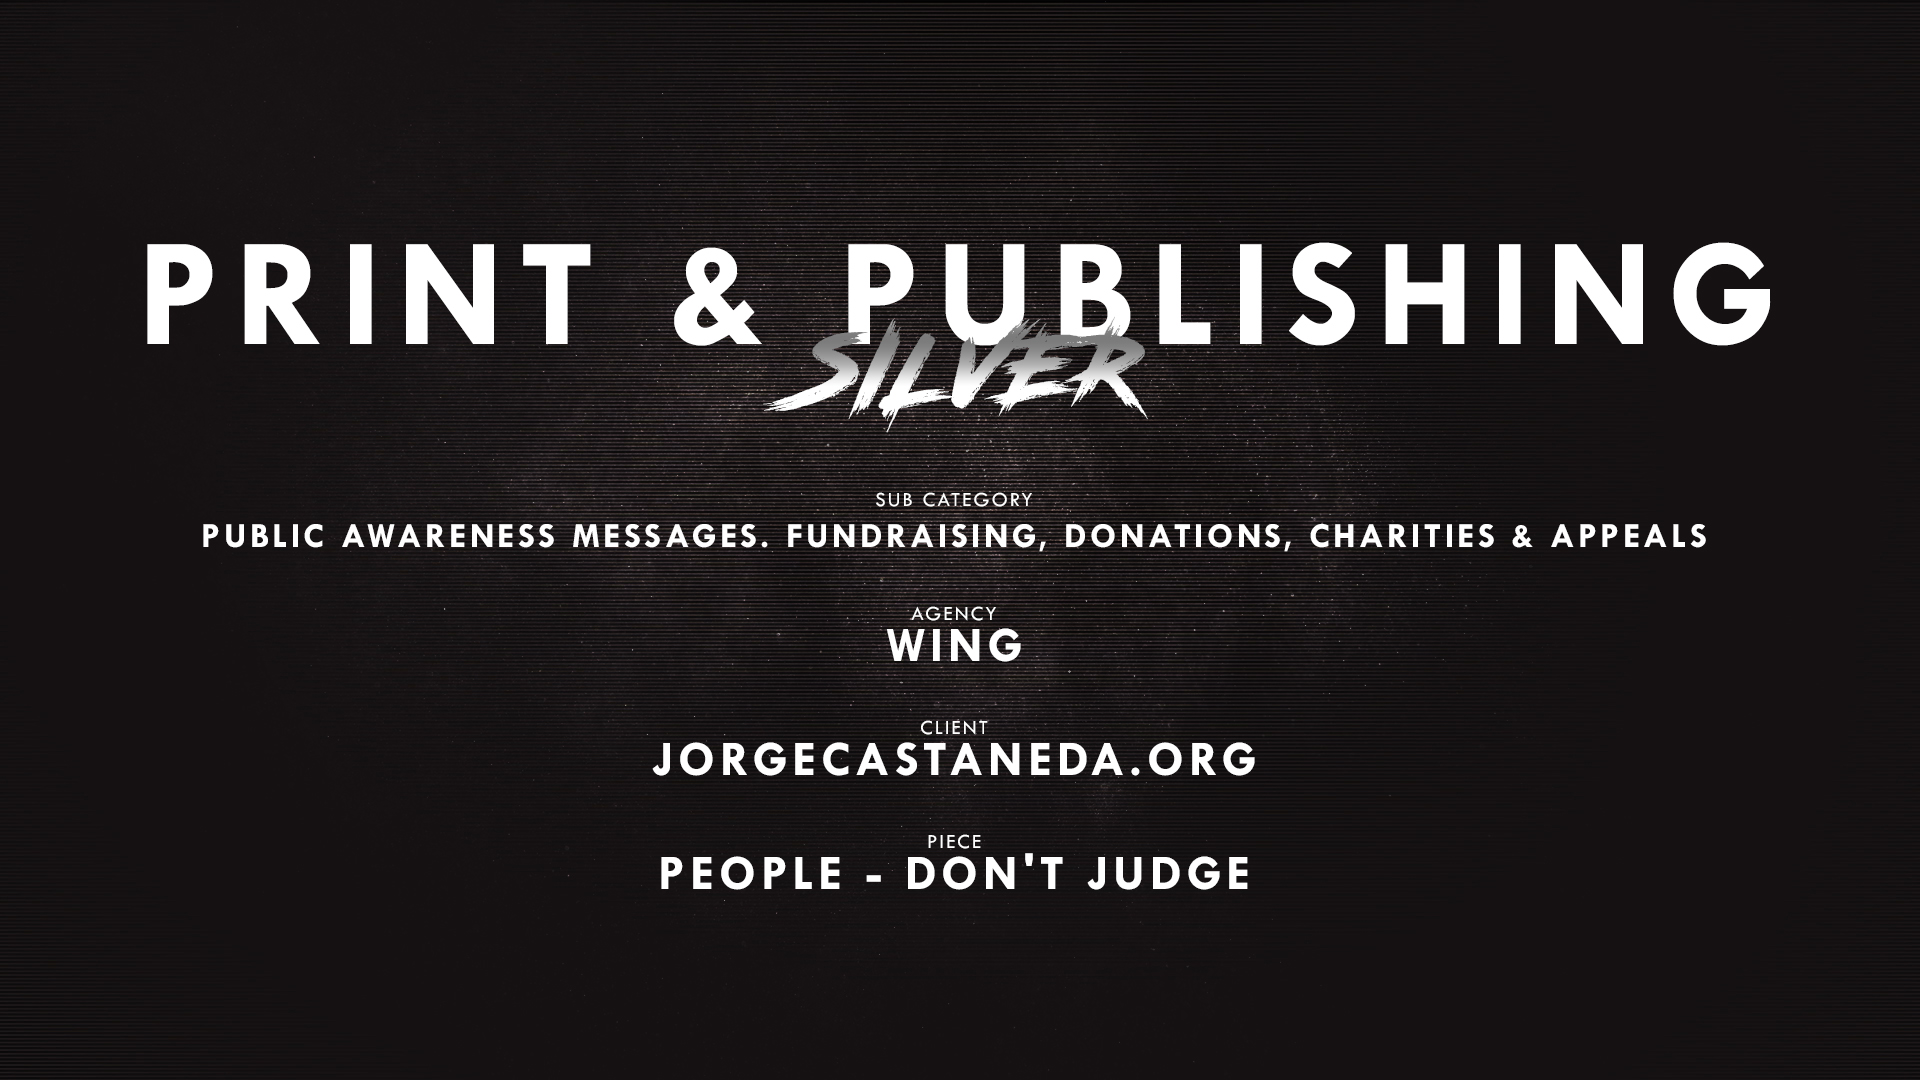 SILVER - PEOPLE - DON'T JUDGE - 186.jpg